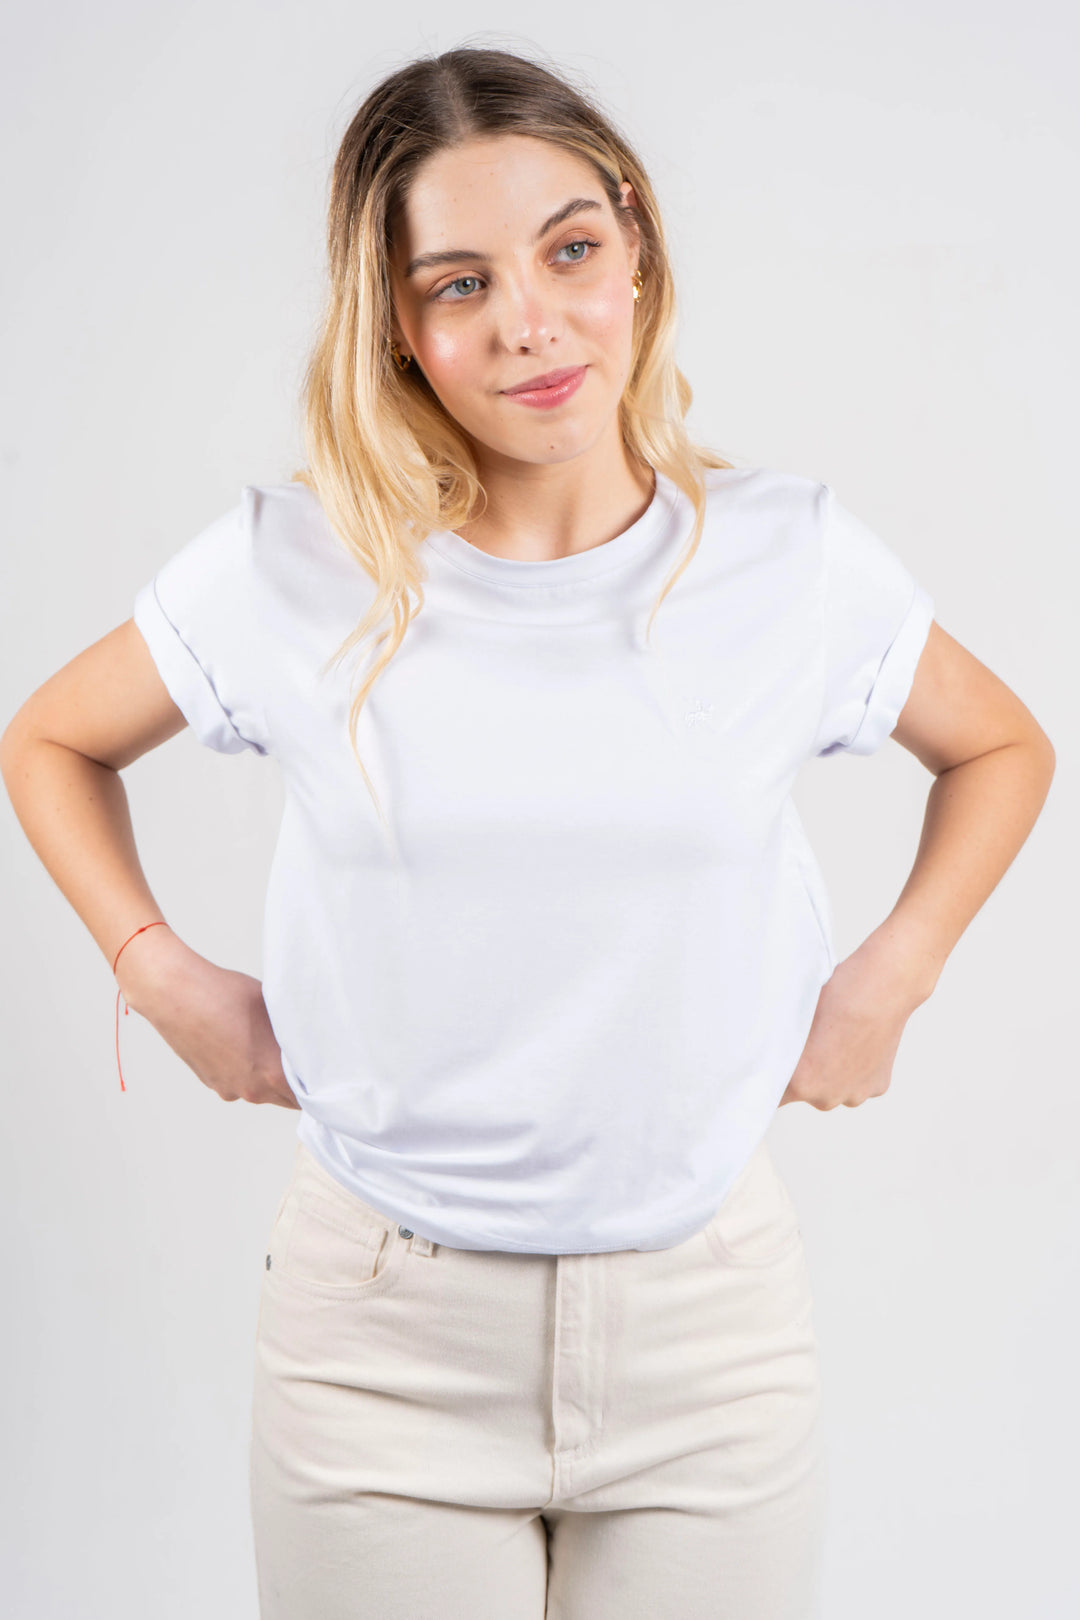 Every Day T Shirt Mujer Blanca - Armatura CO